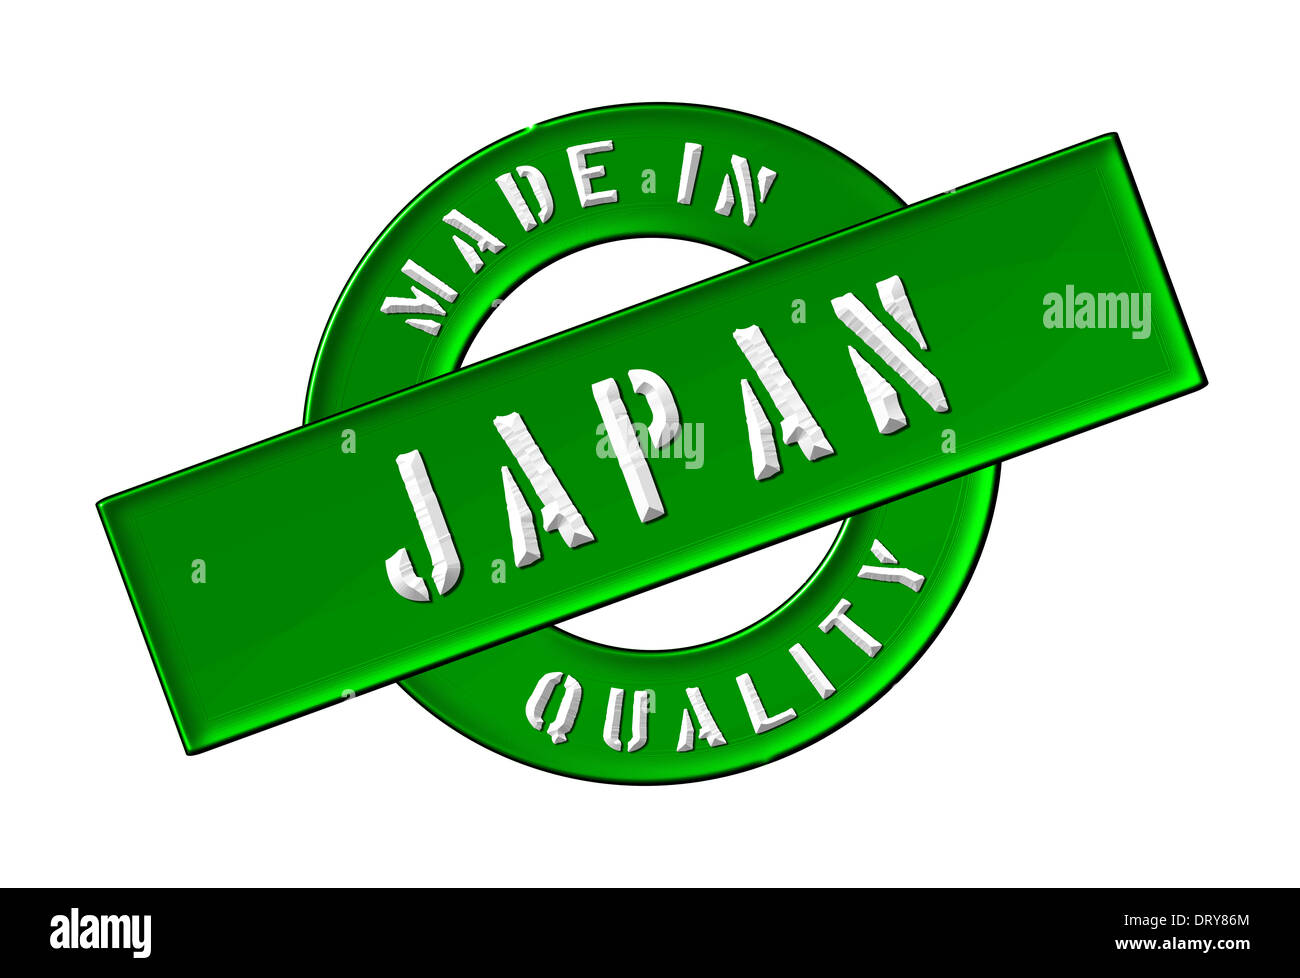 Made in Japan Stock Photo